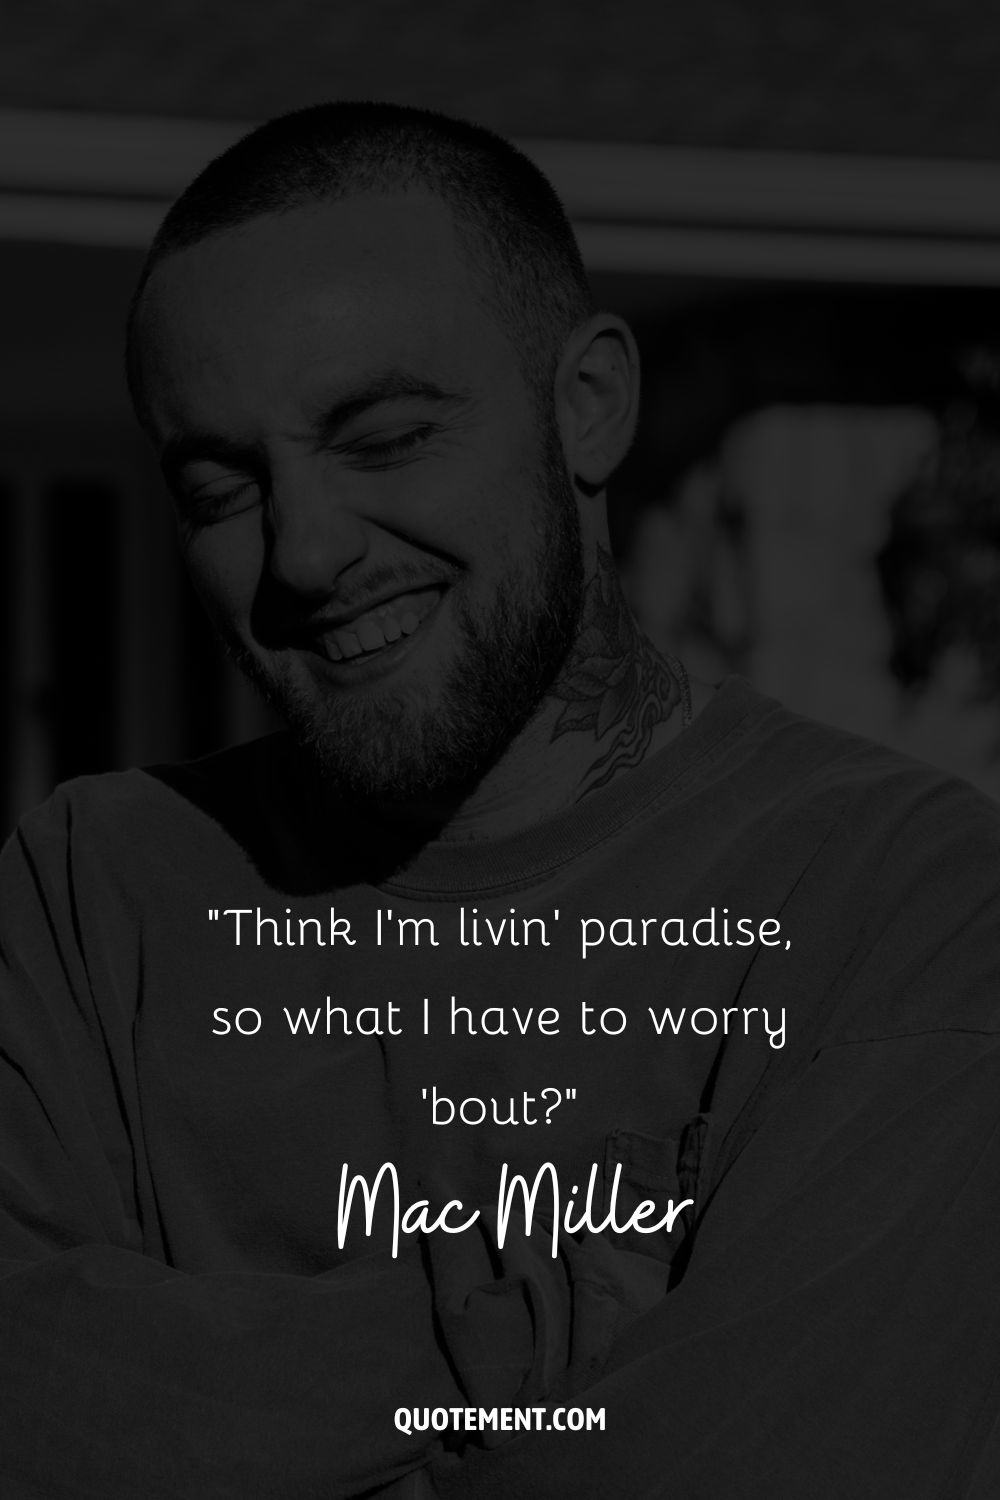 “Think I'm livin' paradise, so what I have to worry 'bout” – Mac Miller